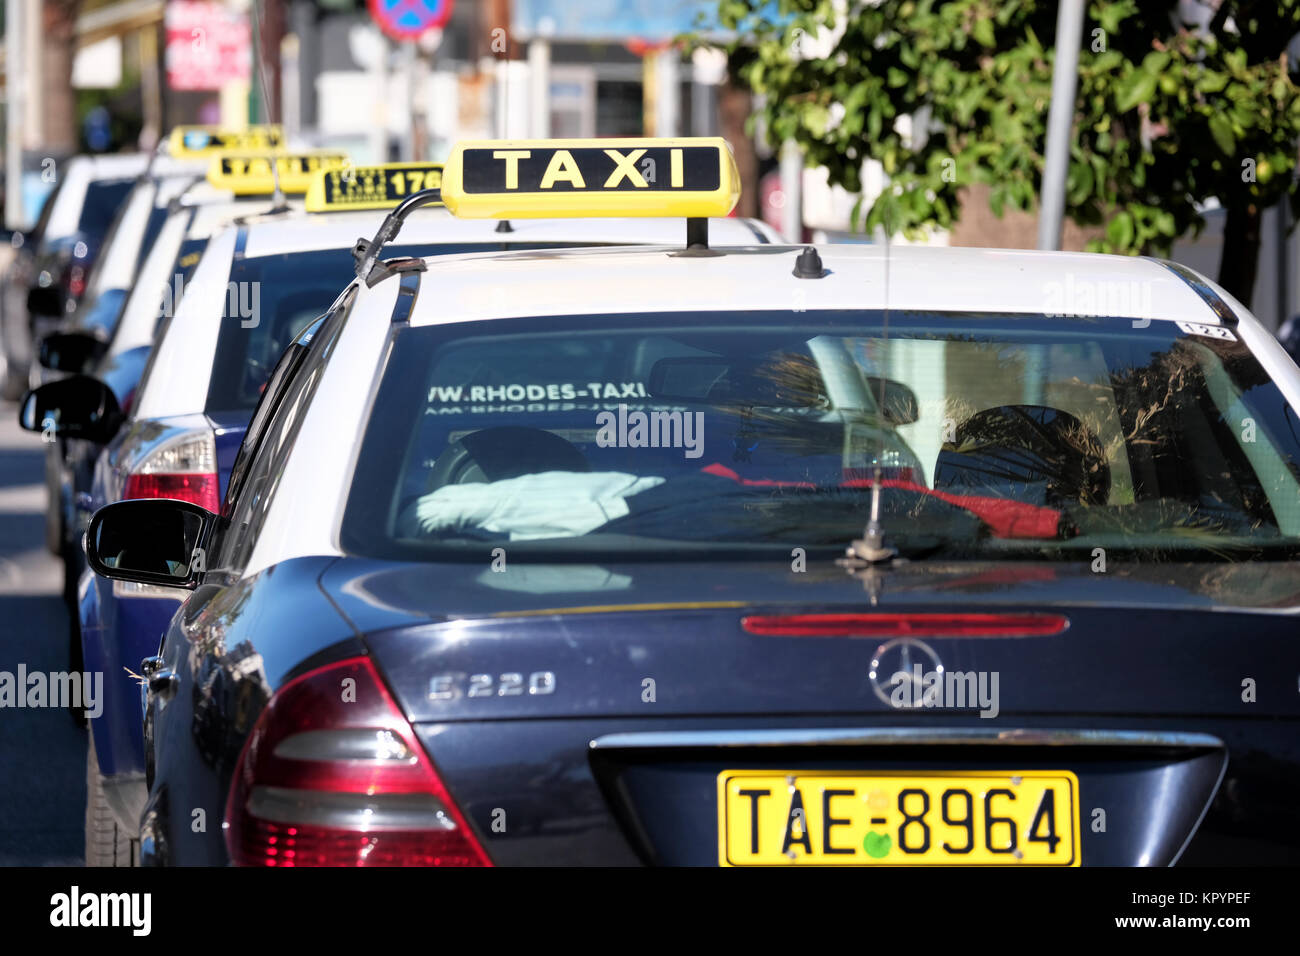 A row of similar liveried  taxi's or cabs waiting on a taxi rank for hire. All are displaying taxi signs and are waiting to be hailed or hired Stock Photo